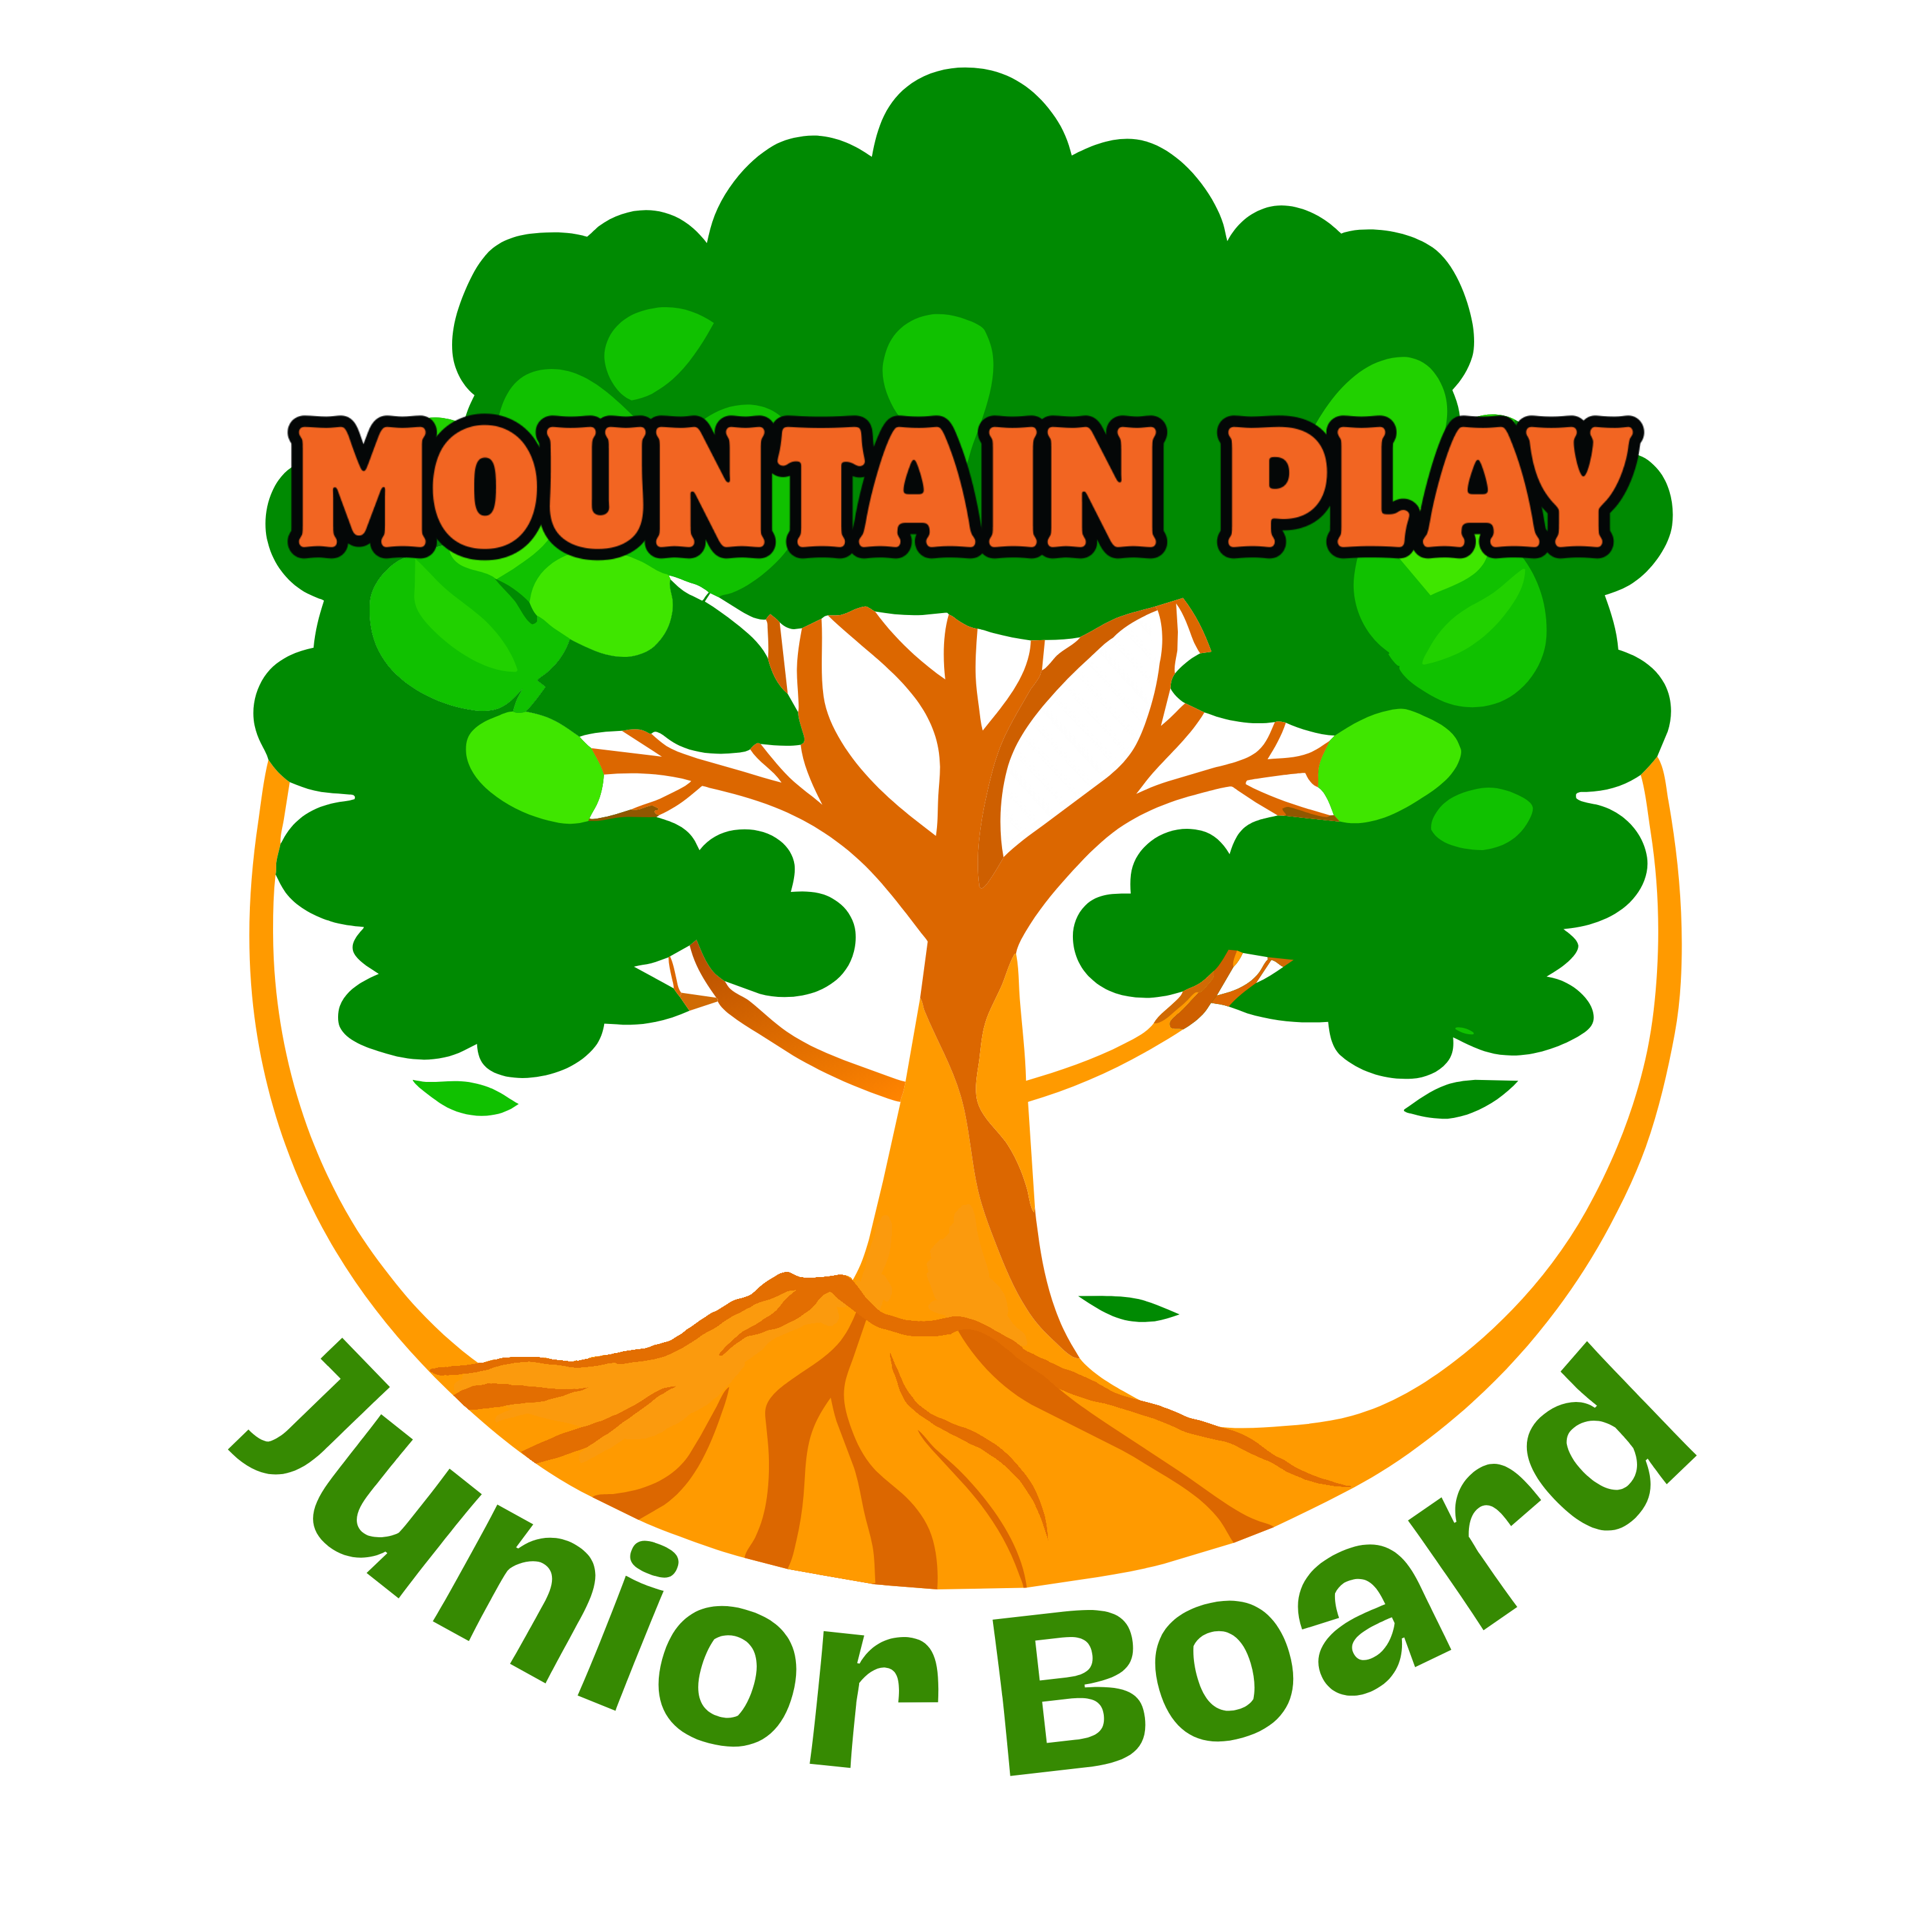 Junior Board Logo, Tree with roots in a circle shape